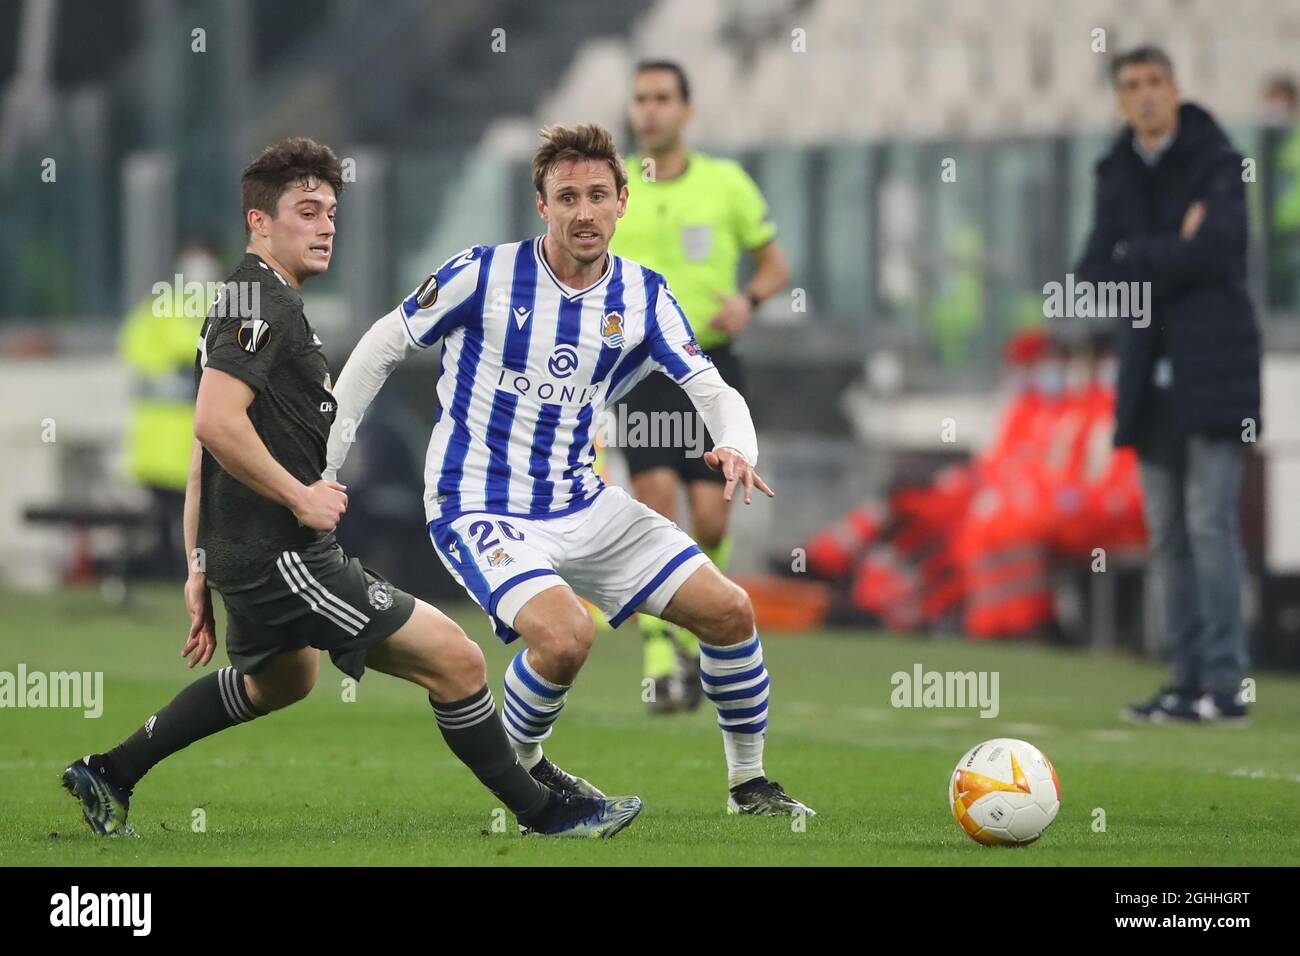 Nacho Monreal of Real Sociedad passes the ball past Daniel James of Manchester United during the UEFA Europa League match at Juventus Stadium, Turin. Picture date: 18th February 2021. Picture credit should read: Jonathan Moscrop/Sportimage via PA Images Stock Photo